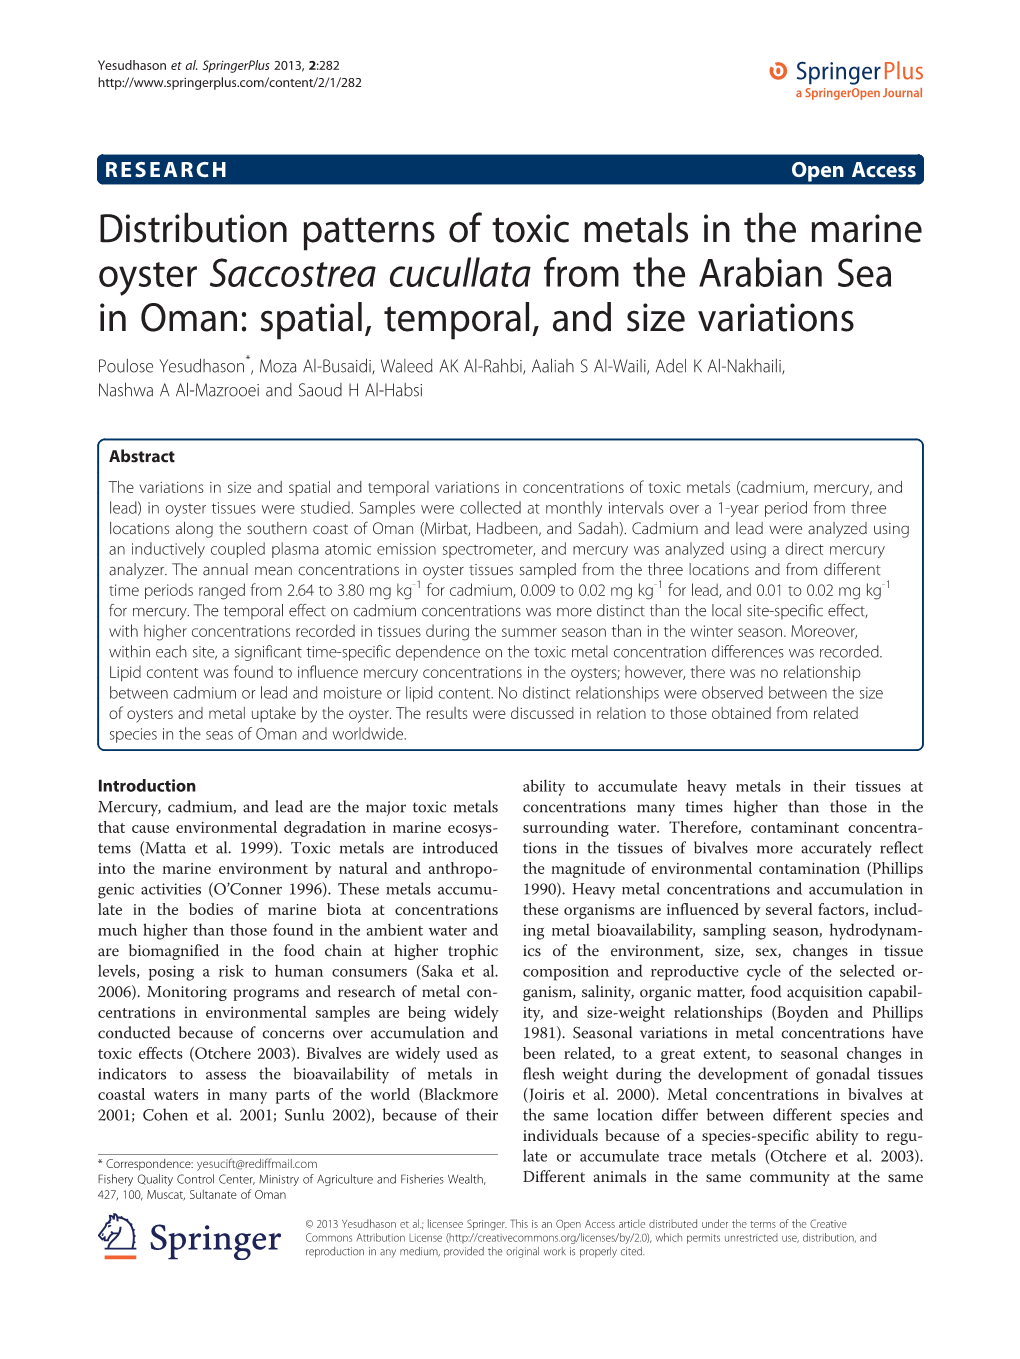 Distribution Patterns of Toxic Metals in the Marine Oyster